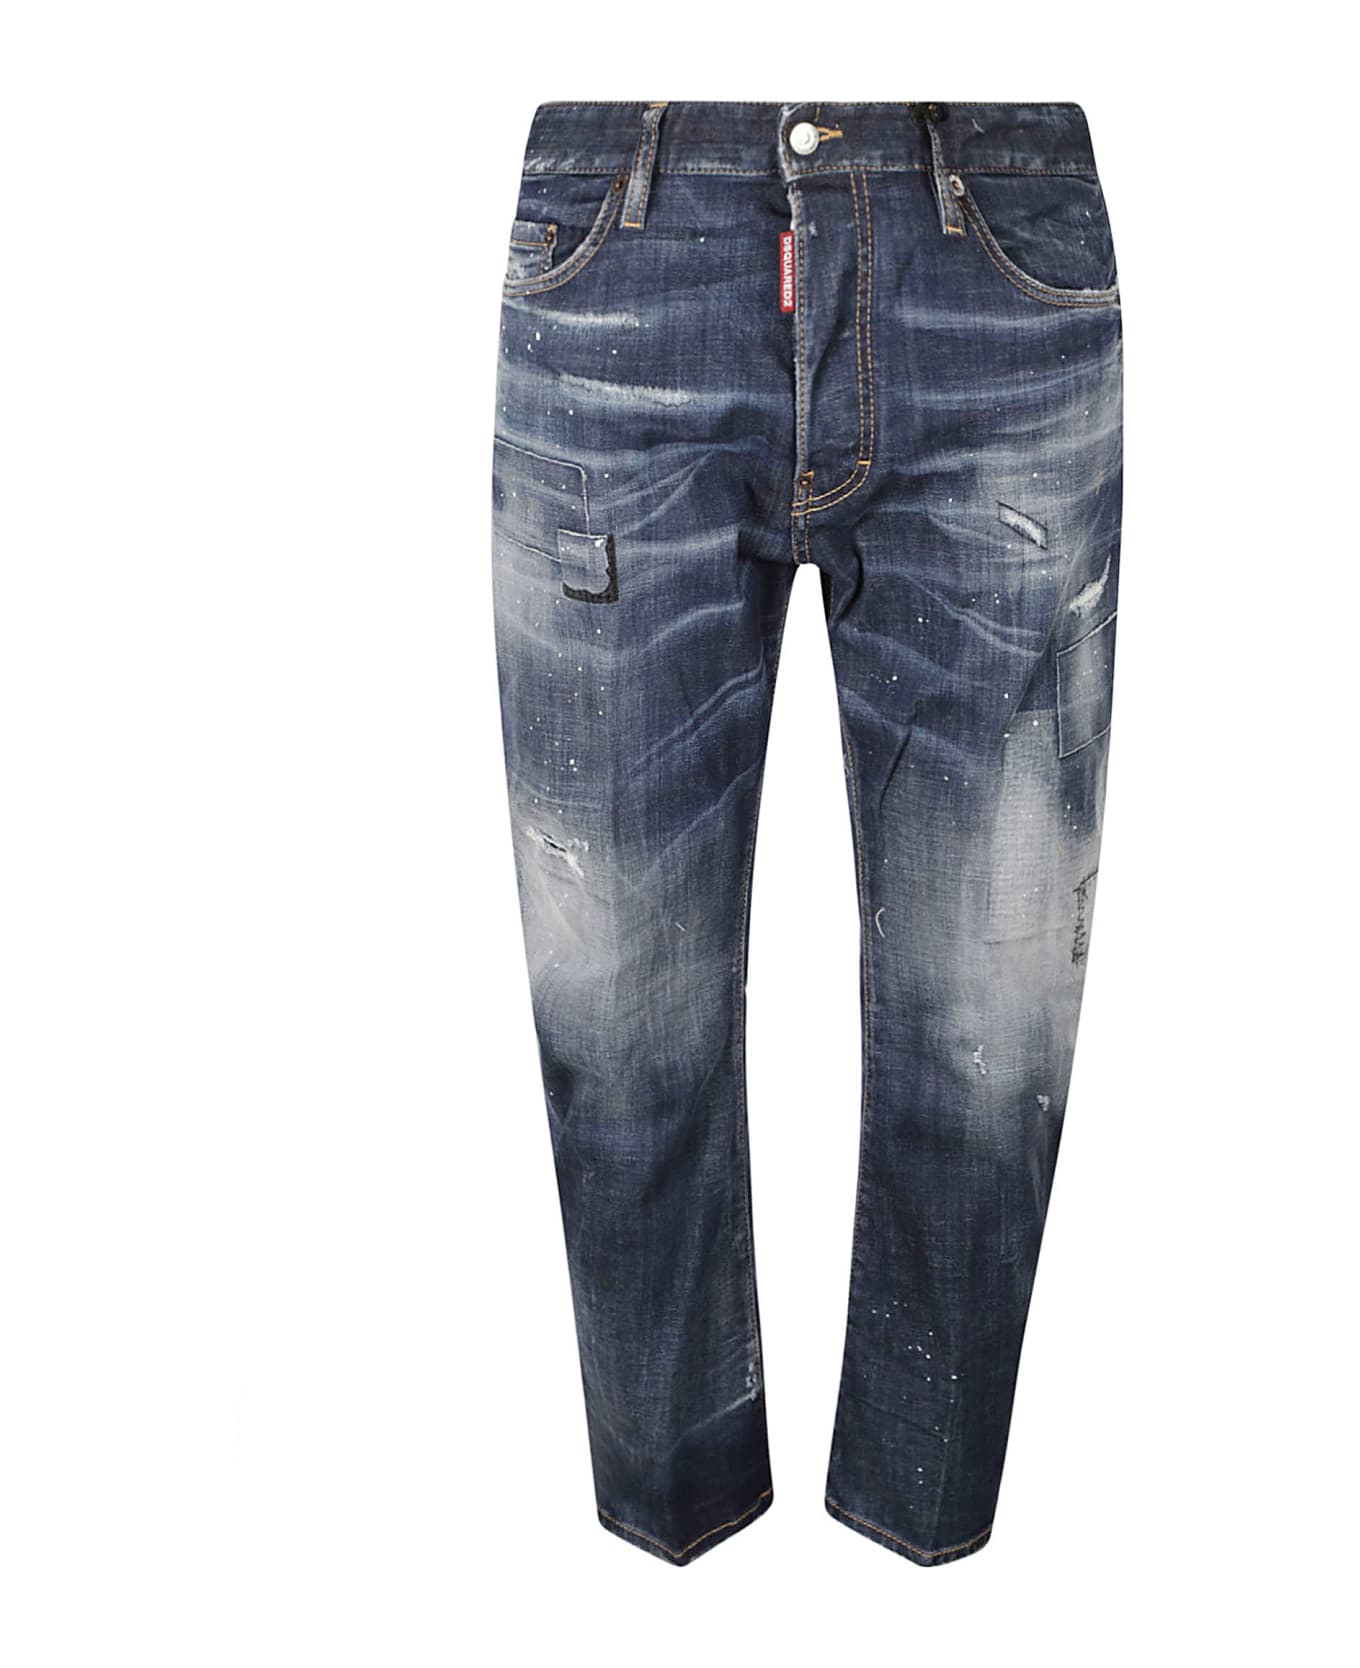 Dsquared2 Bro Jeans - Navy